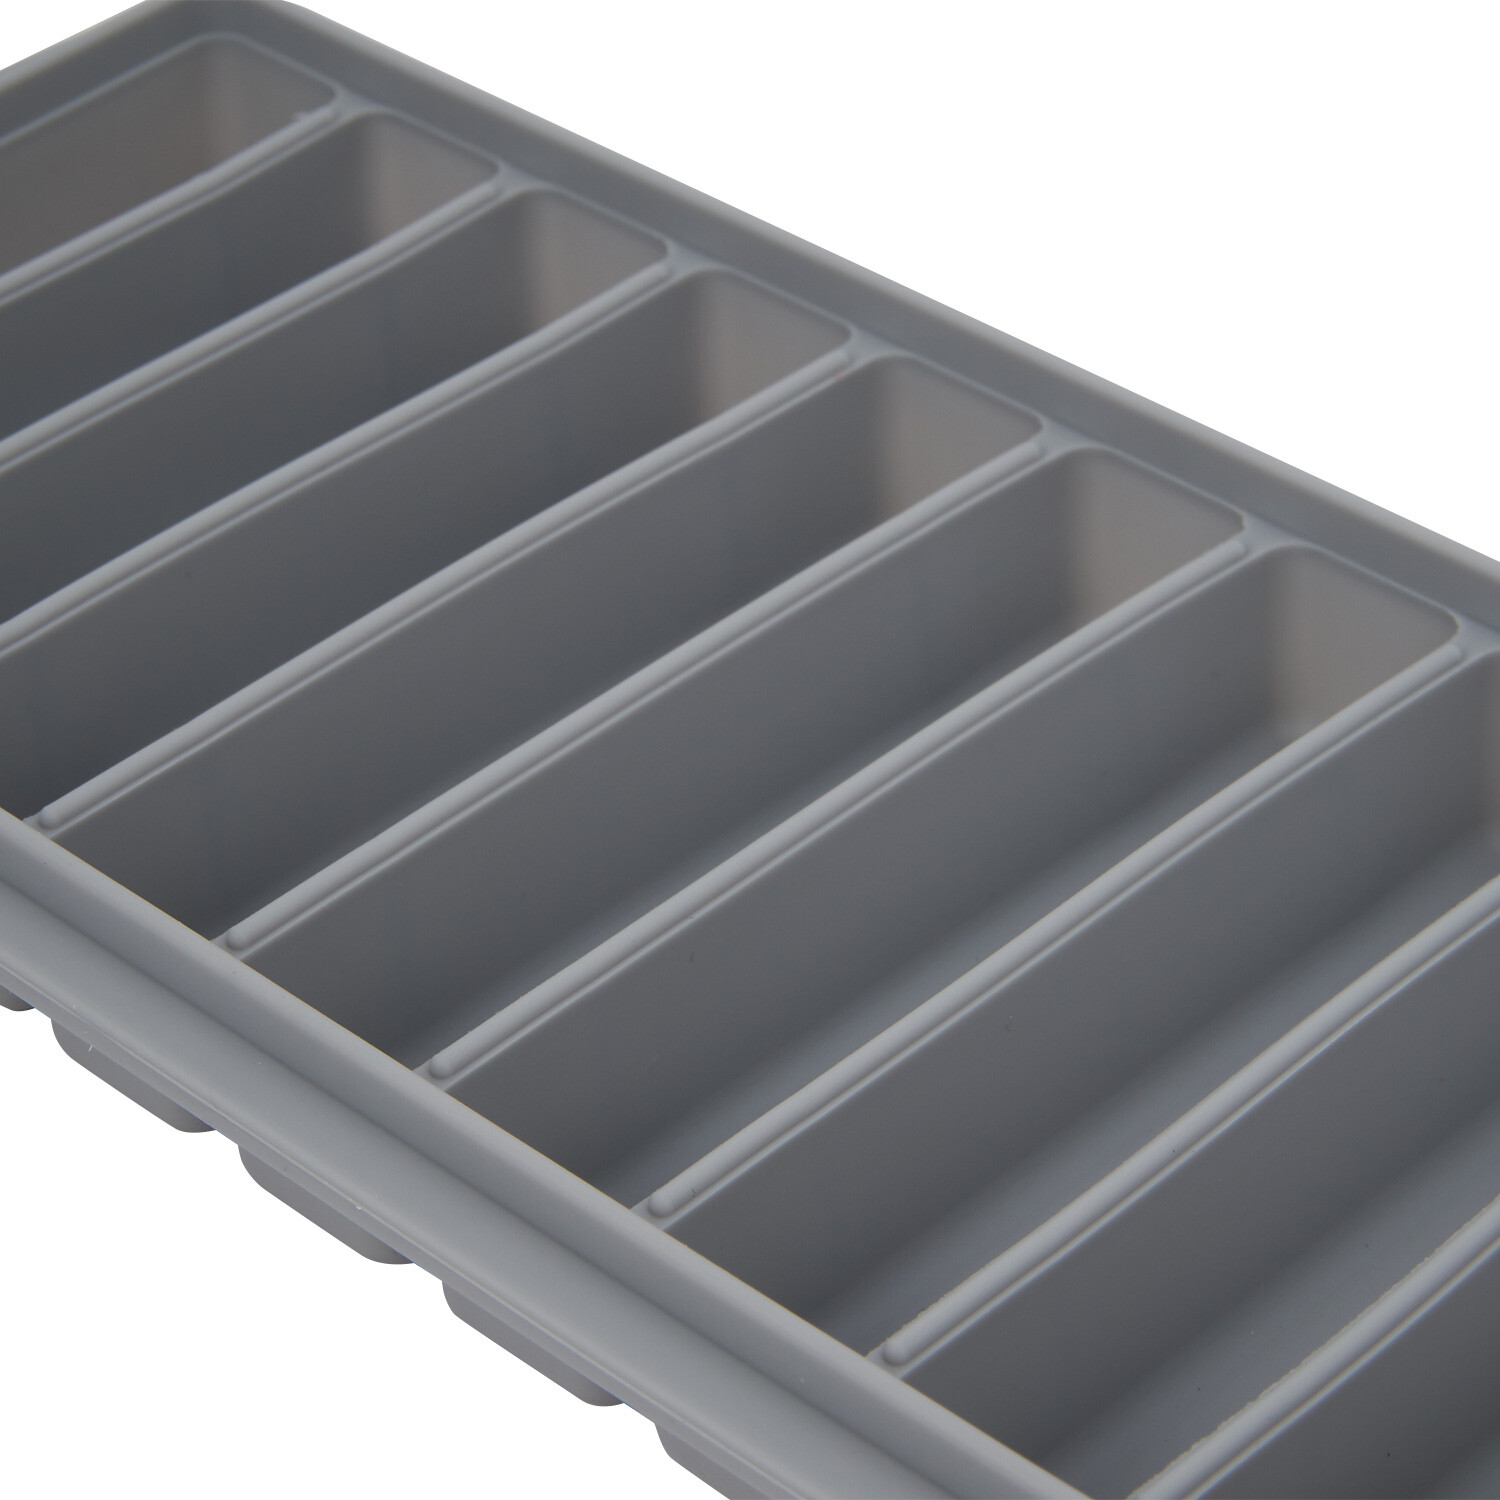 10 Bar Silicone Ice Mould with Lid - Grey Image 2